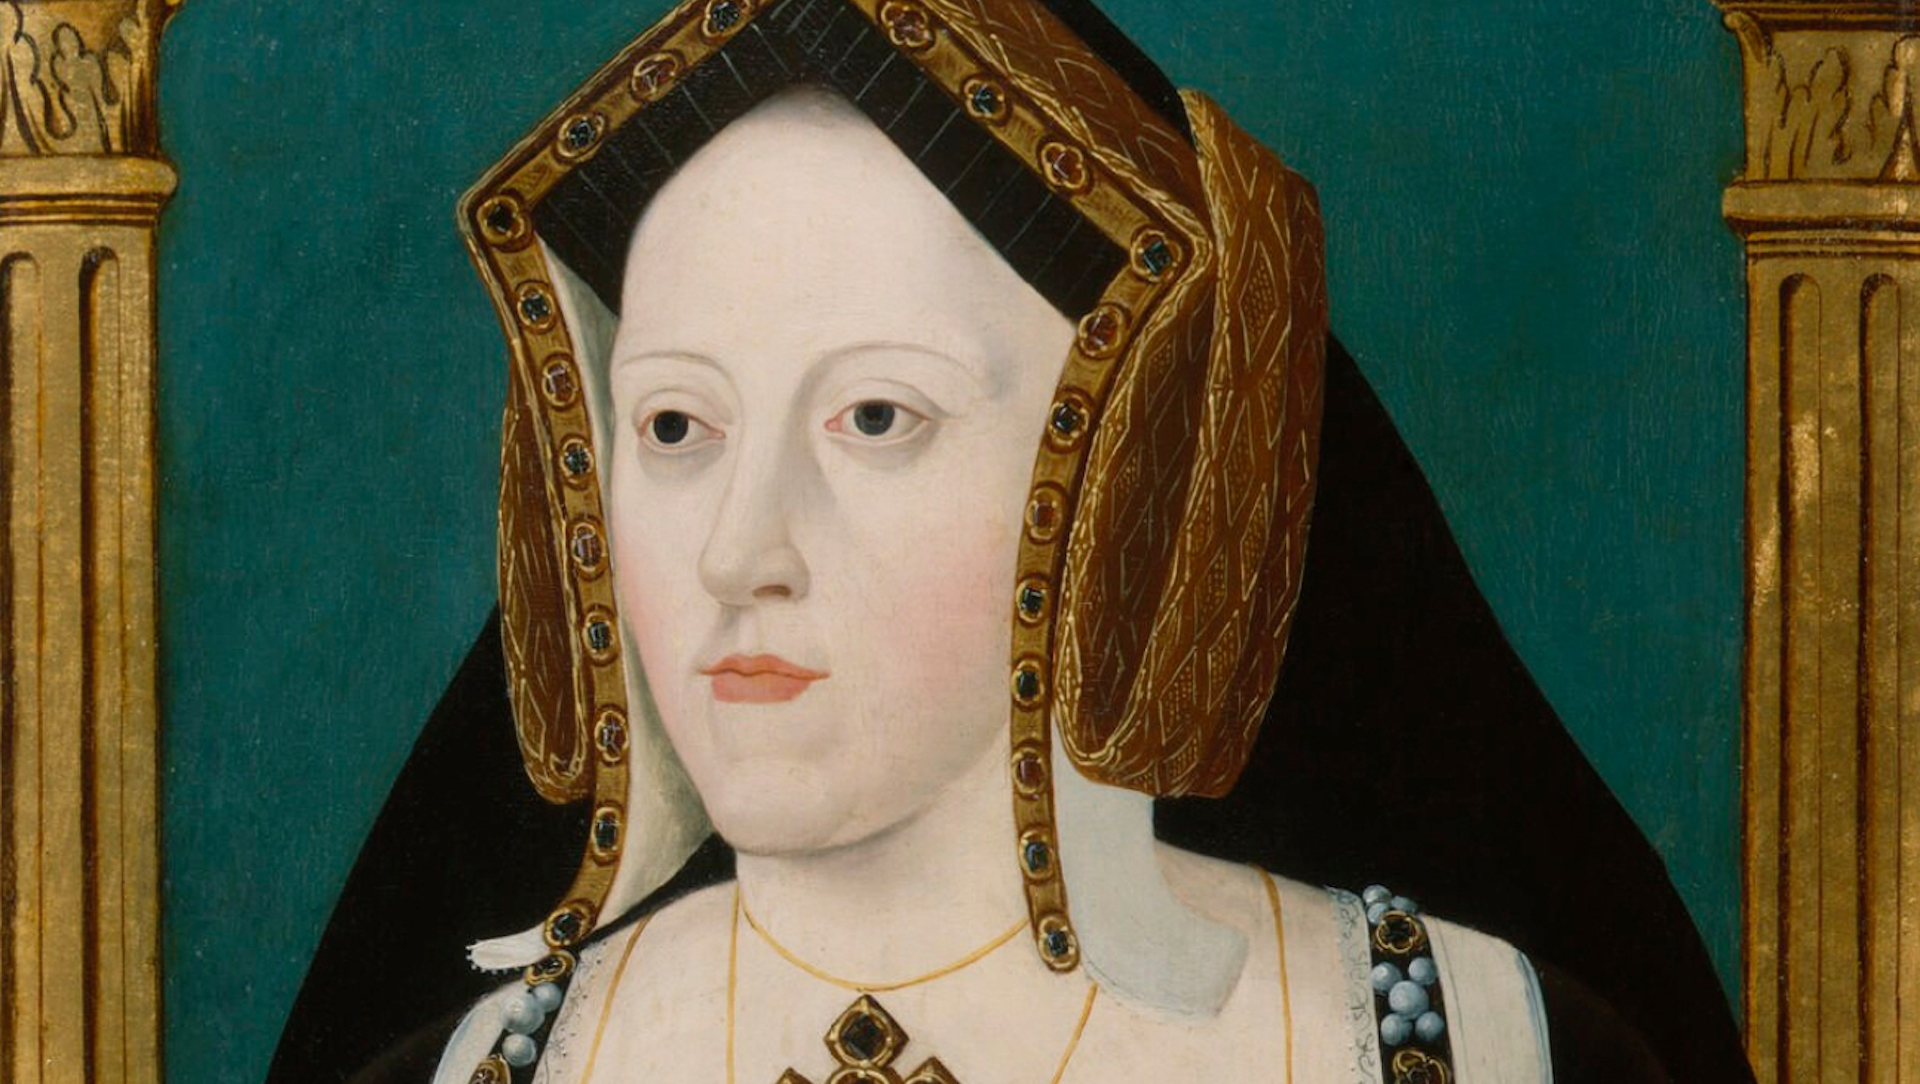 A portrait of Henry VIII's first wife